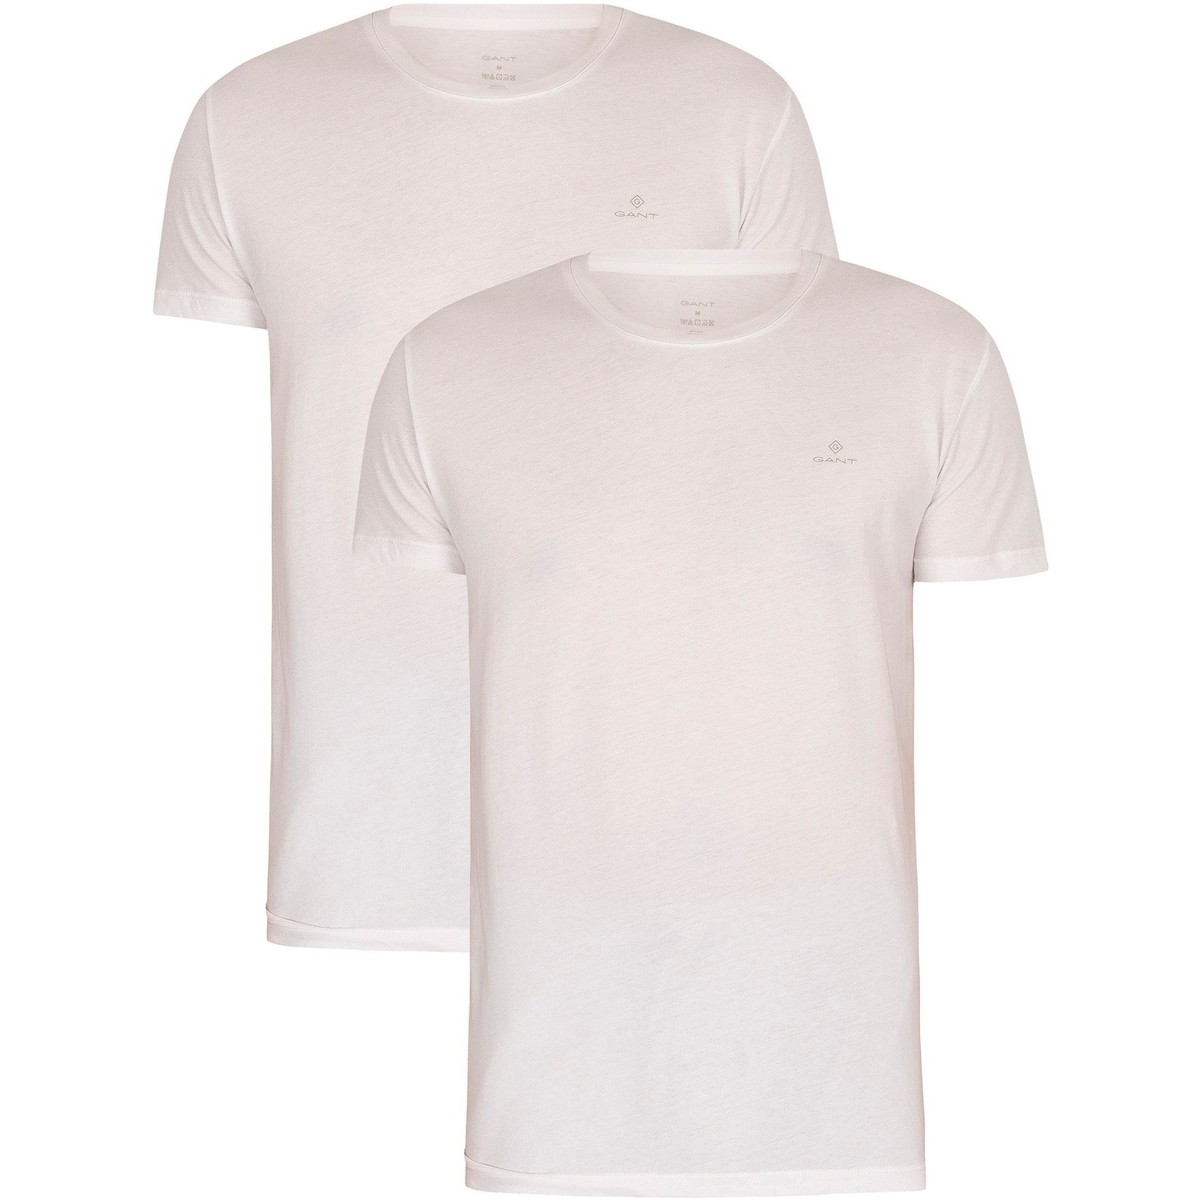 Clothing Men Sleepsuits Gant 2 Pack Essentials Lounge T-Shirts white